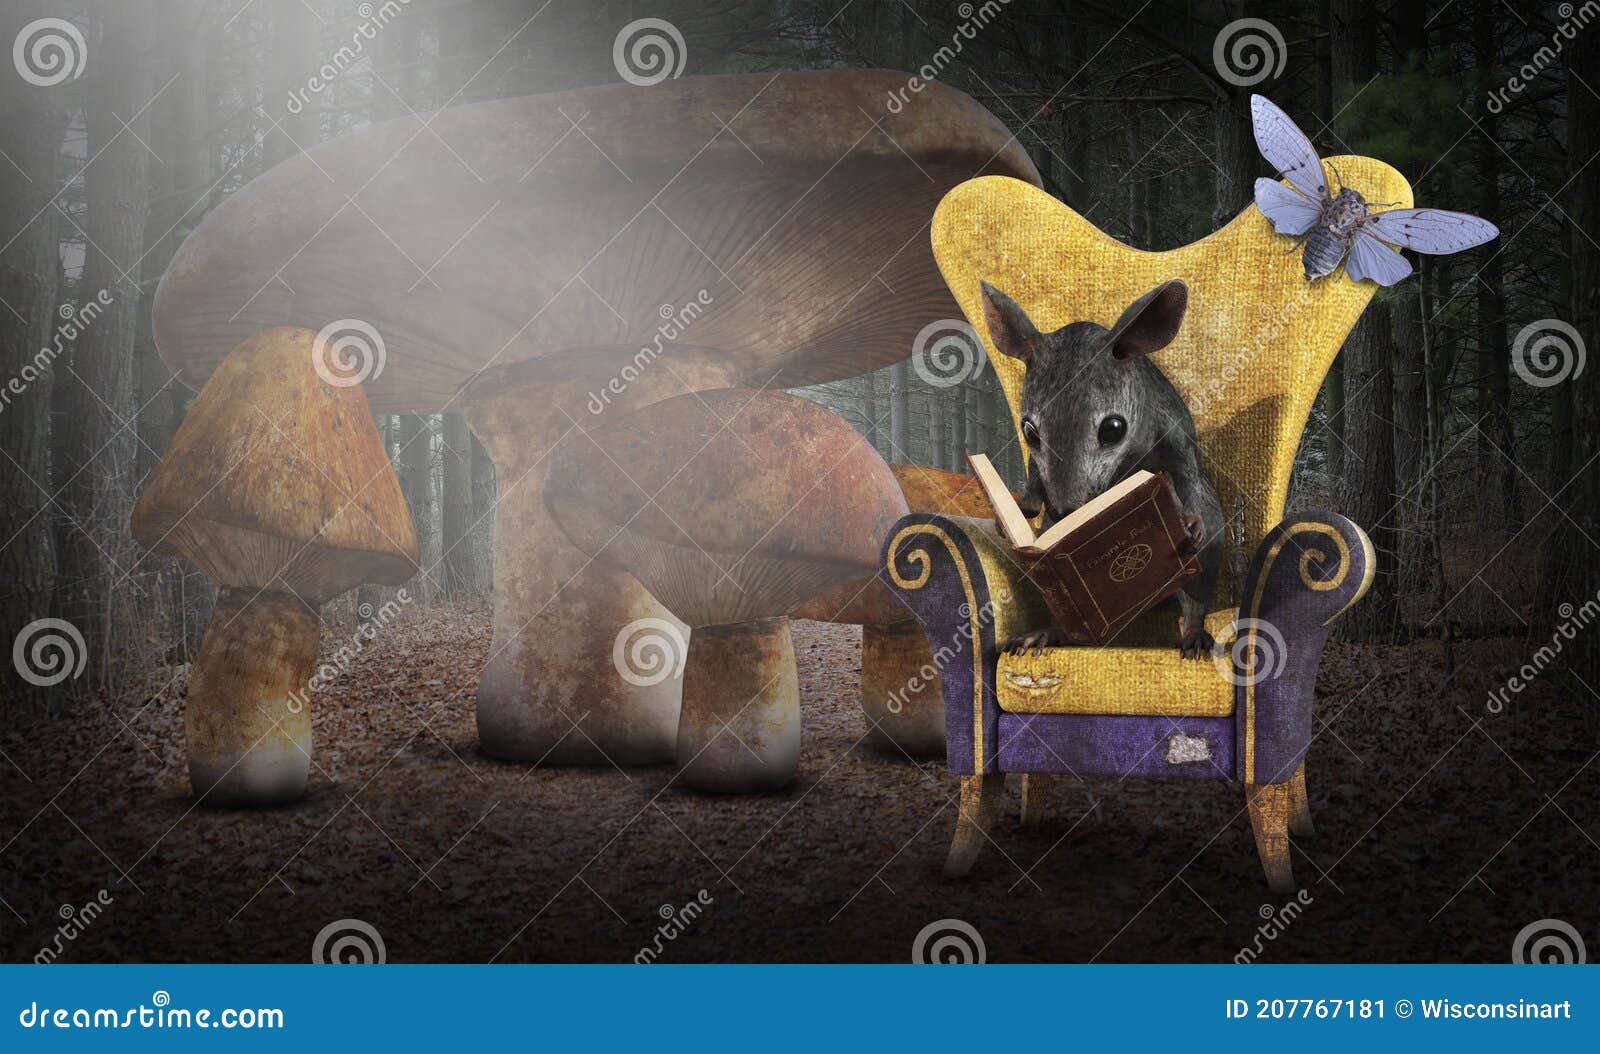 fantasy mouse reading book, fairytale